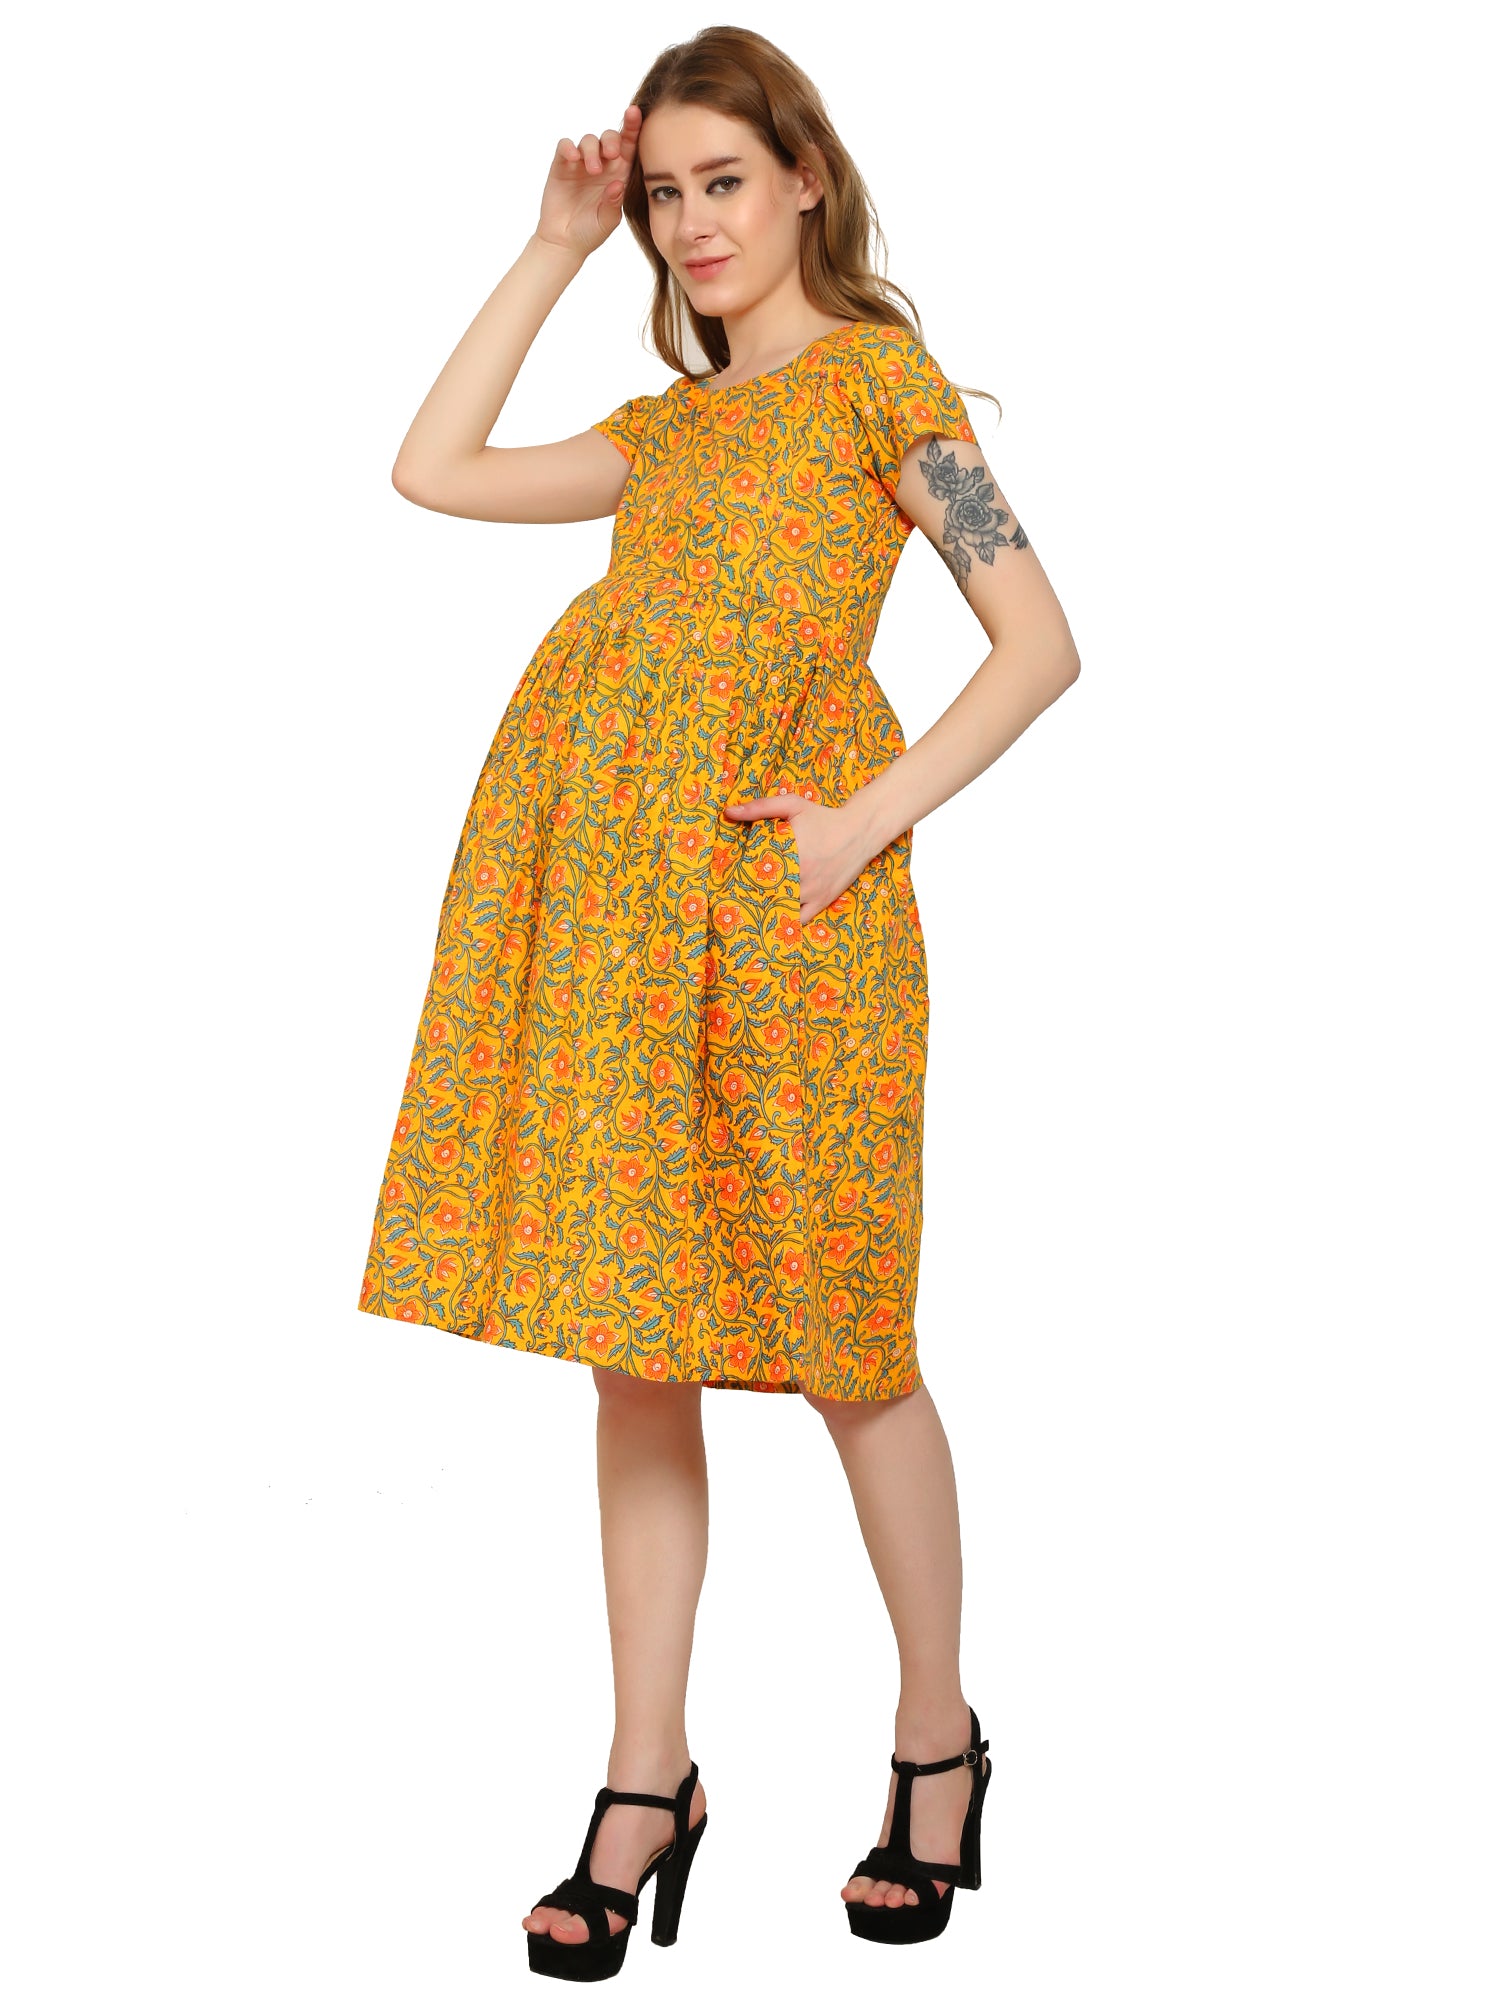 Yellow Fit and Flare Cotton Maternity and Feeding Dress